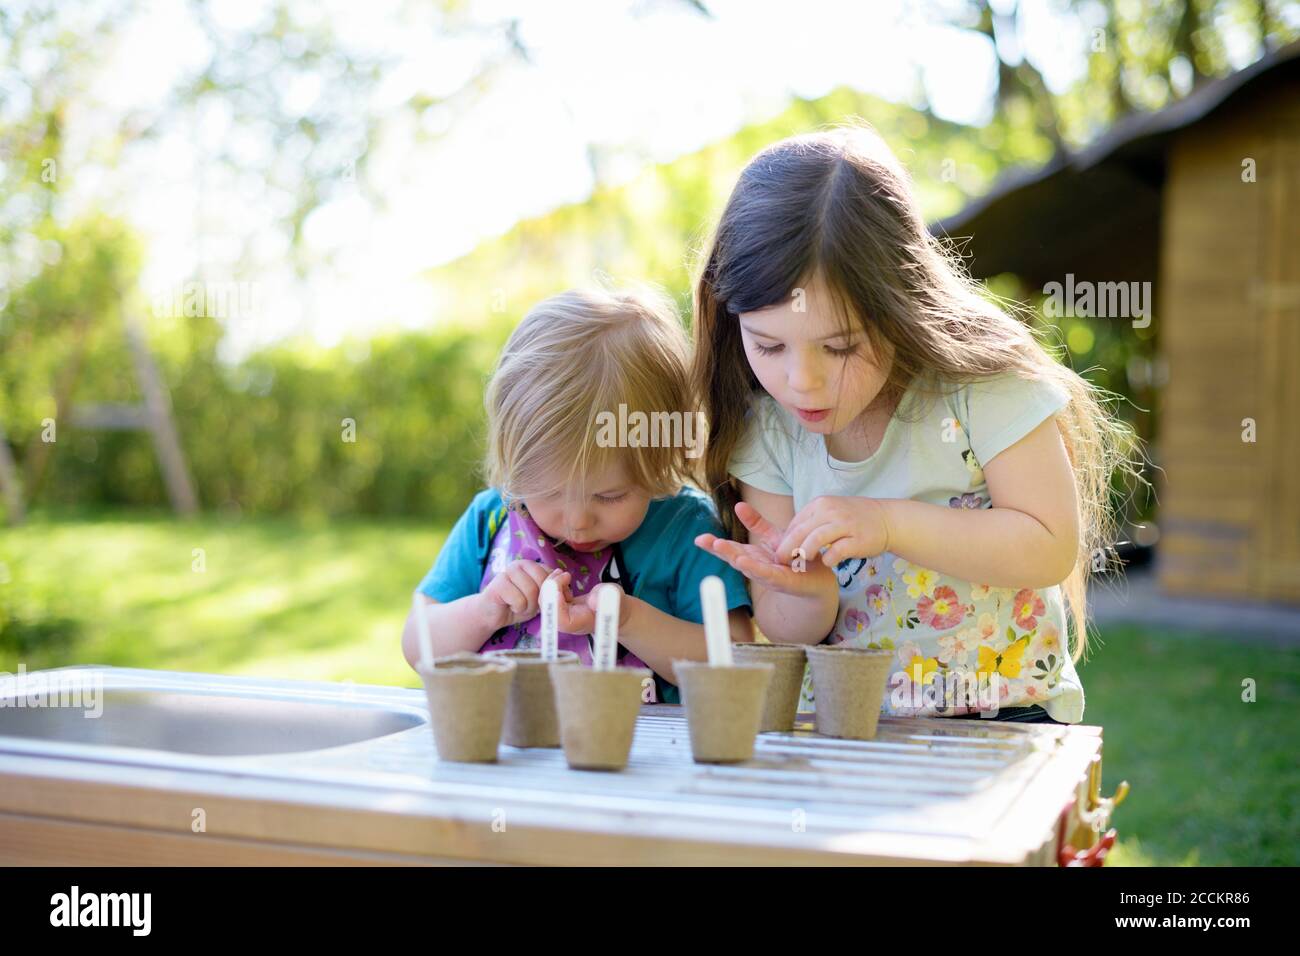 Cute girls planting seeds in small pots on table at yard Stock Photo